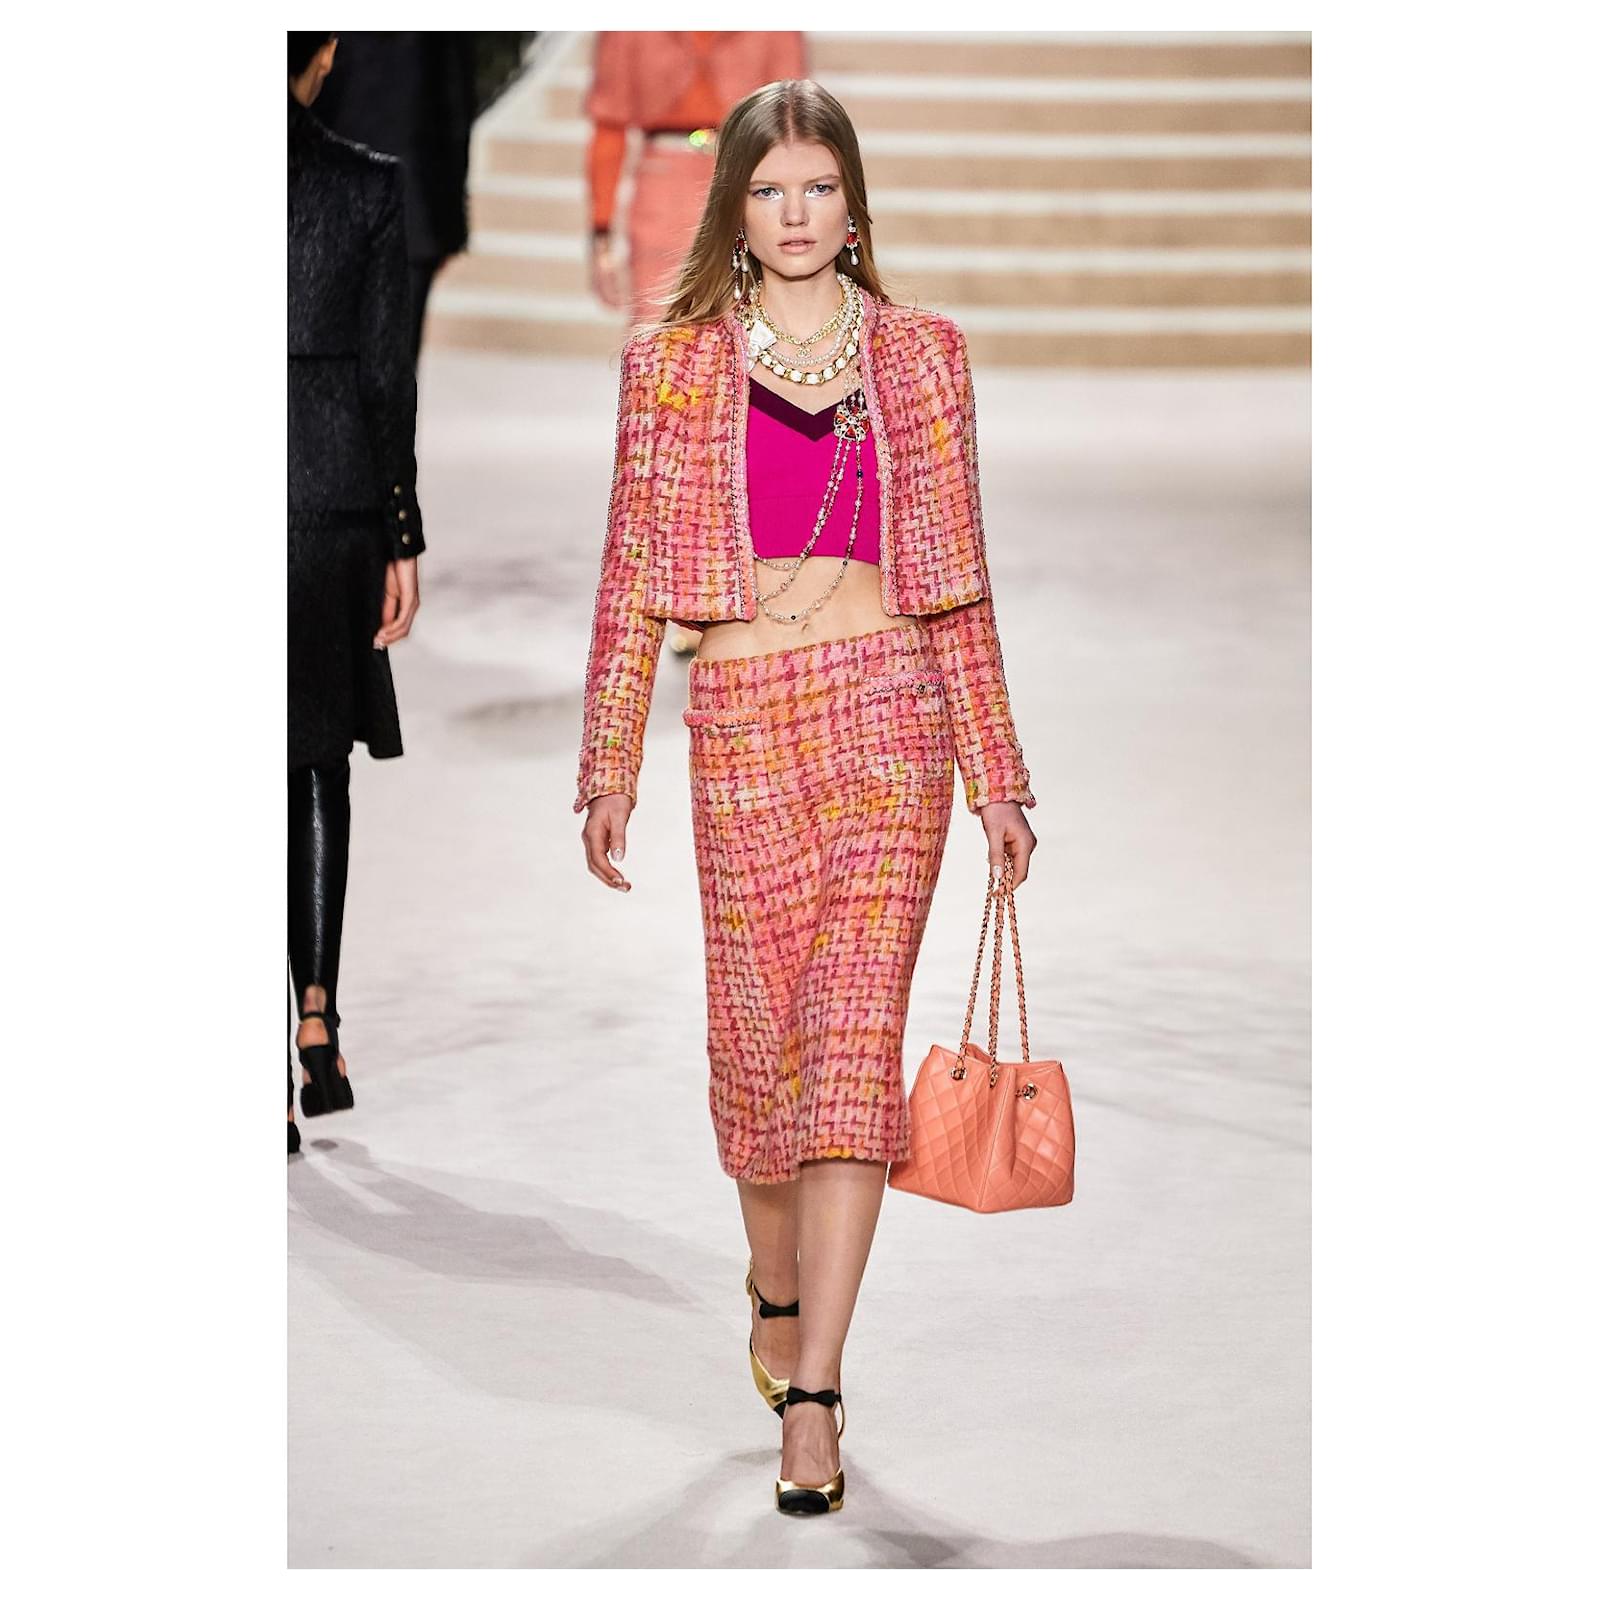 CHANEL 14A Fall 2014 Supermarket Collection Pink Tweed Jacket ref